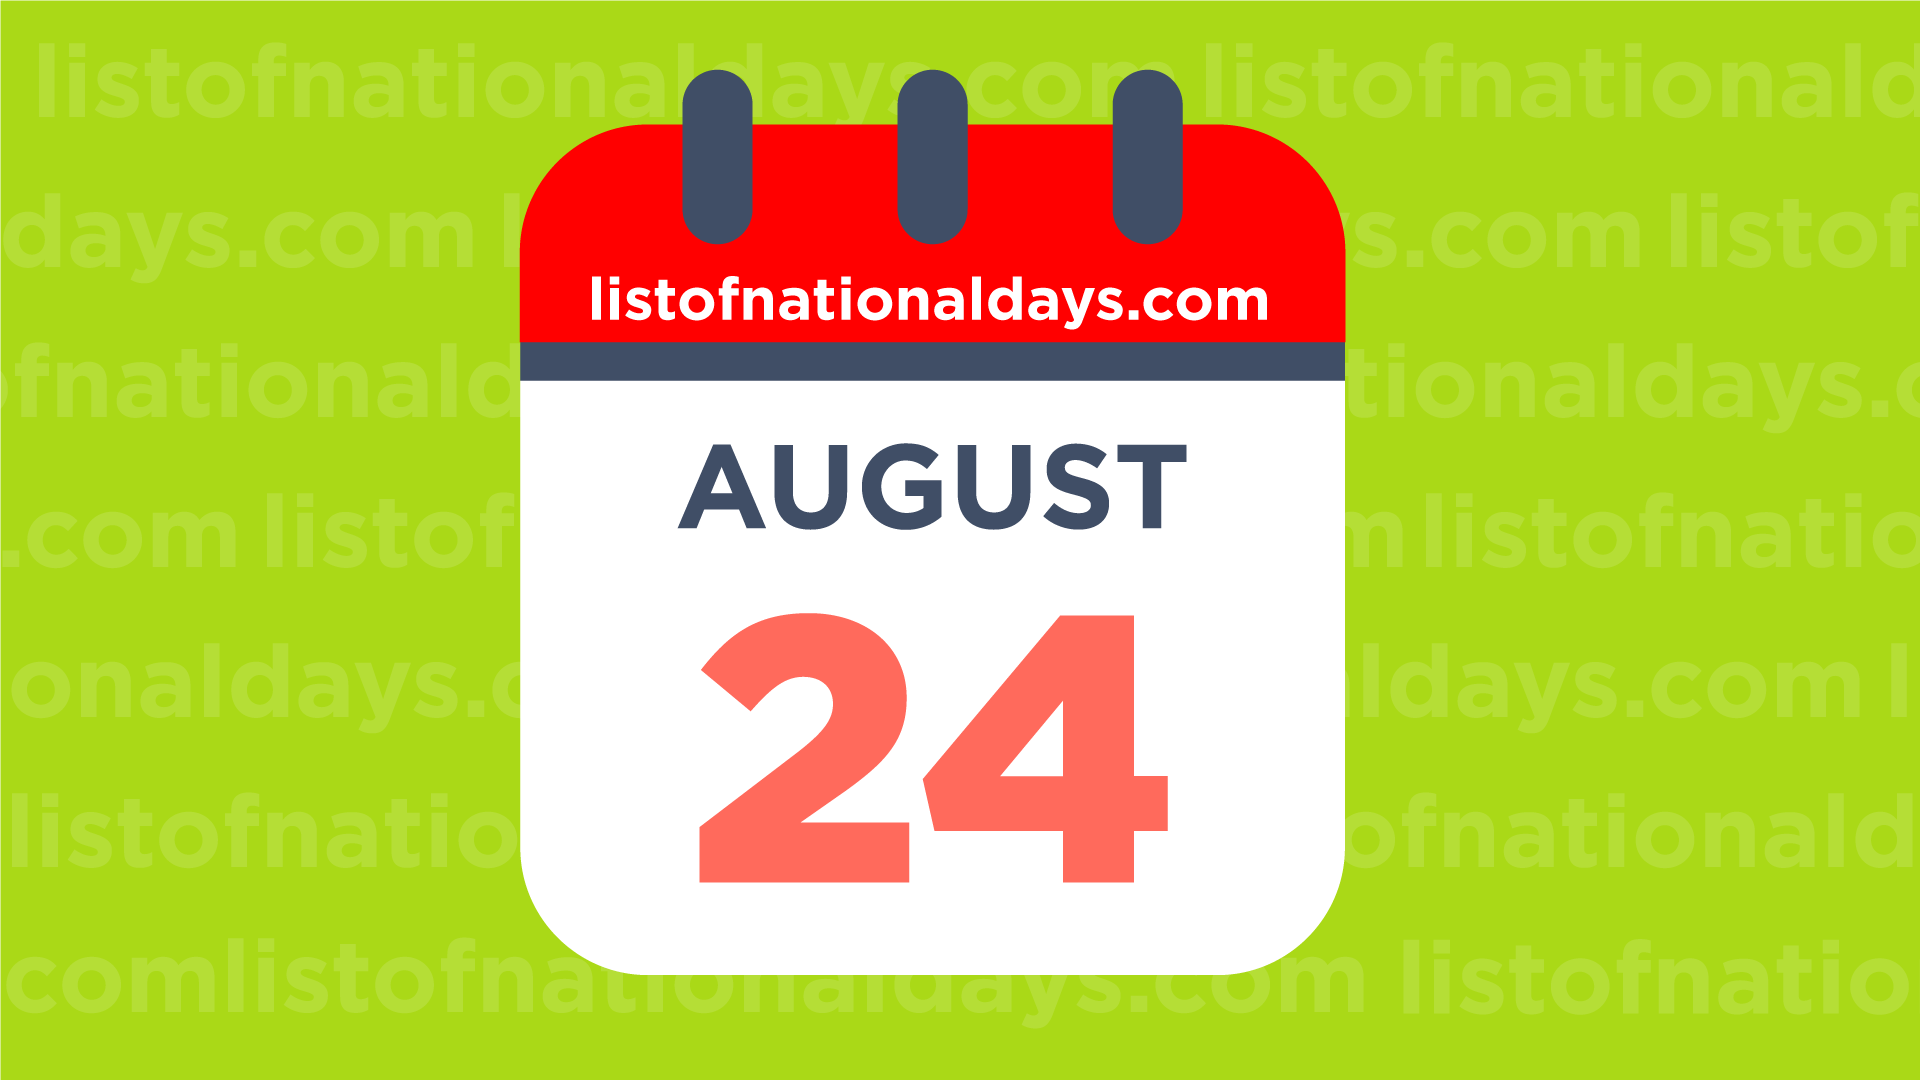 August 24th National Holidays,Observances and Famous Birthdays